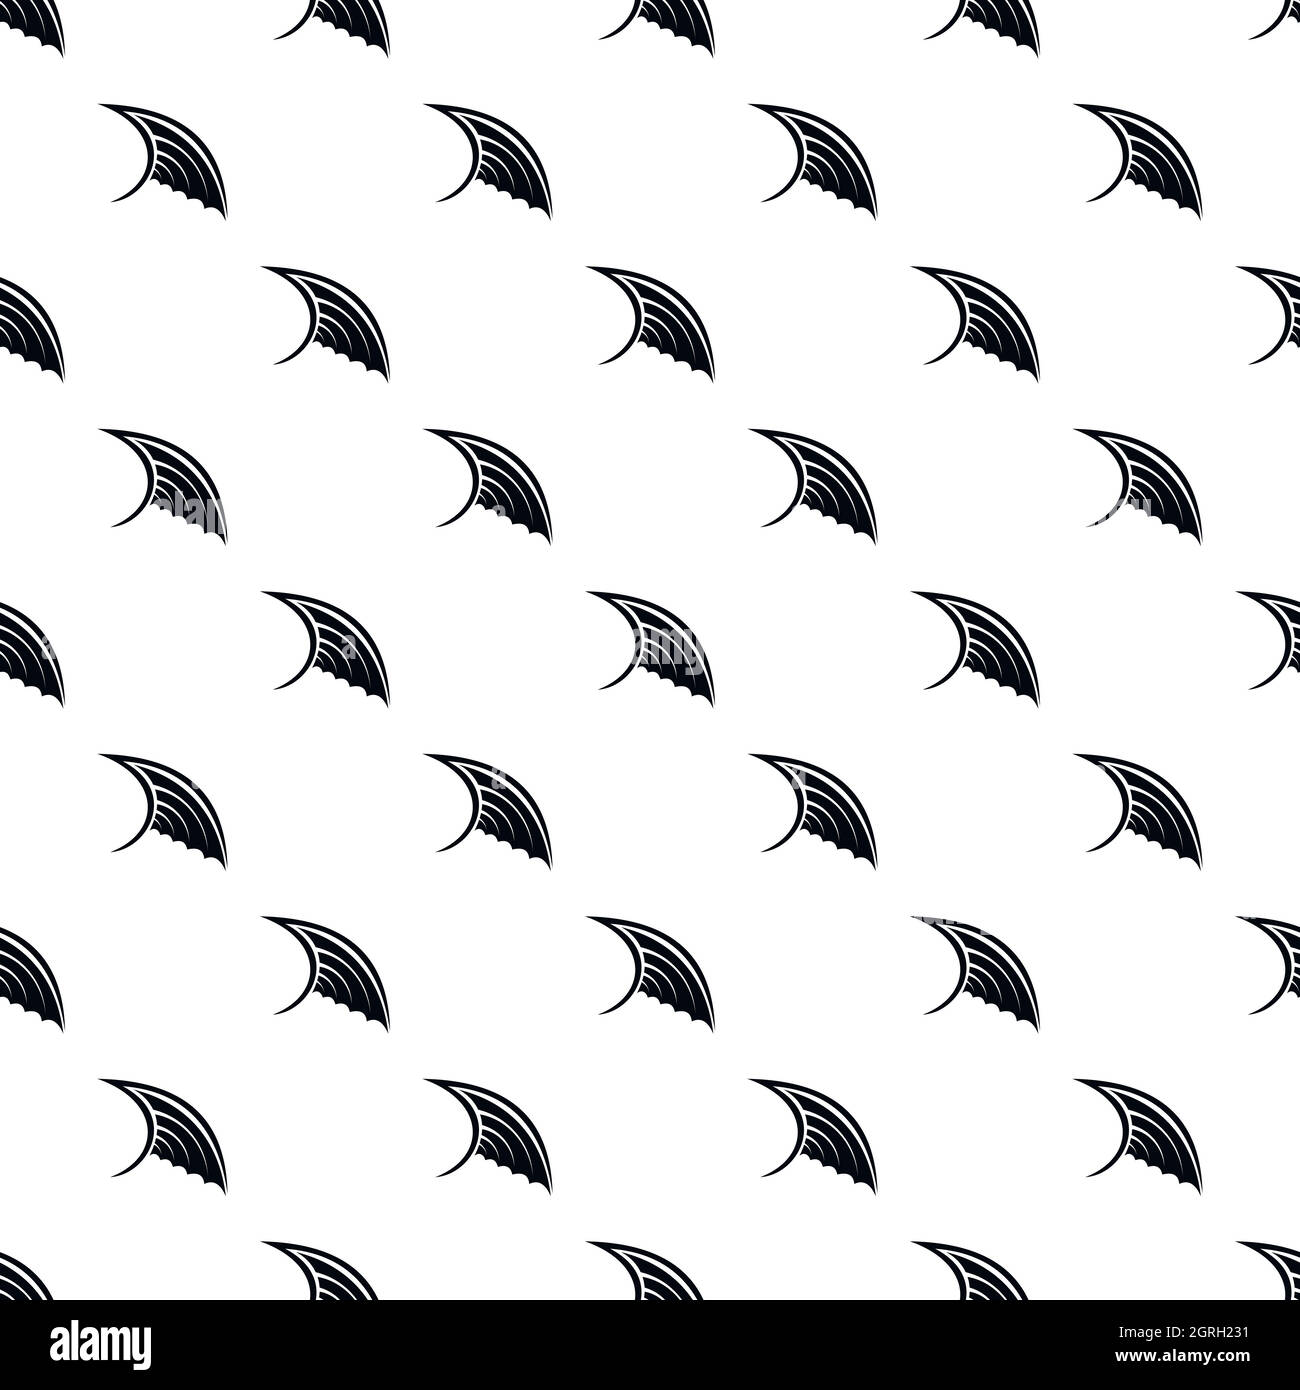 Angel birds wing pattern, simple style Stock Vector